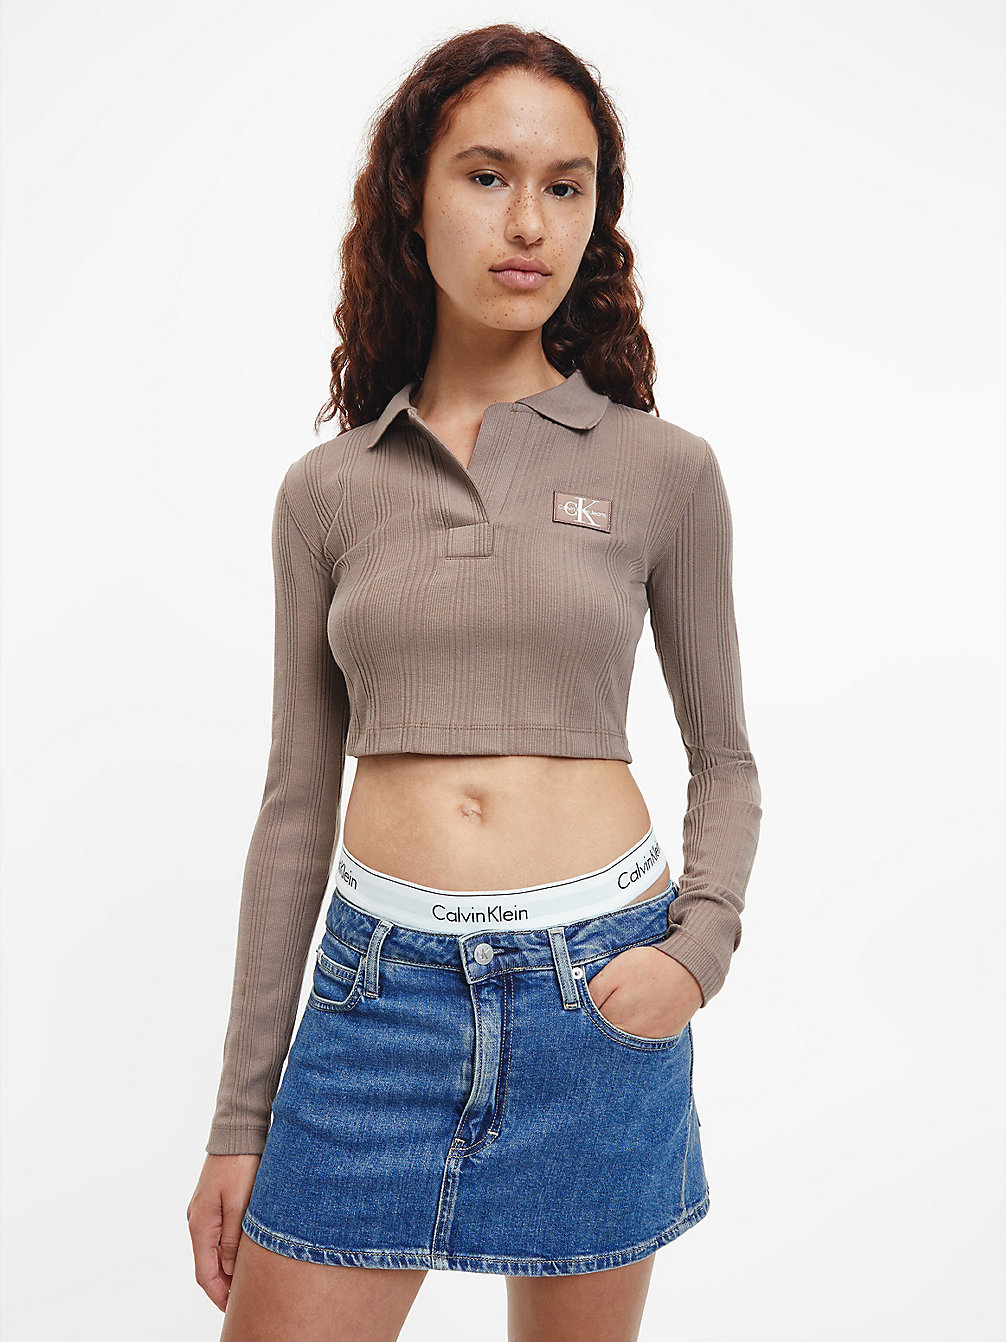 Polo Slim Cropped > WARM TOFFEE > undefined mujer > Calvin Klein